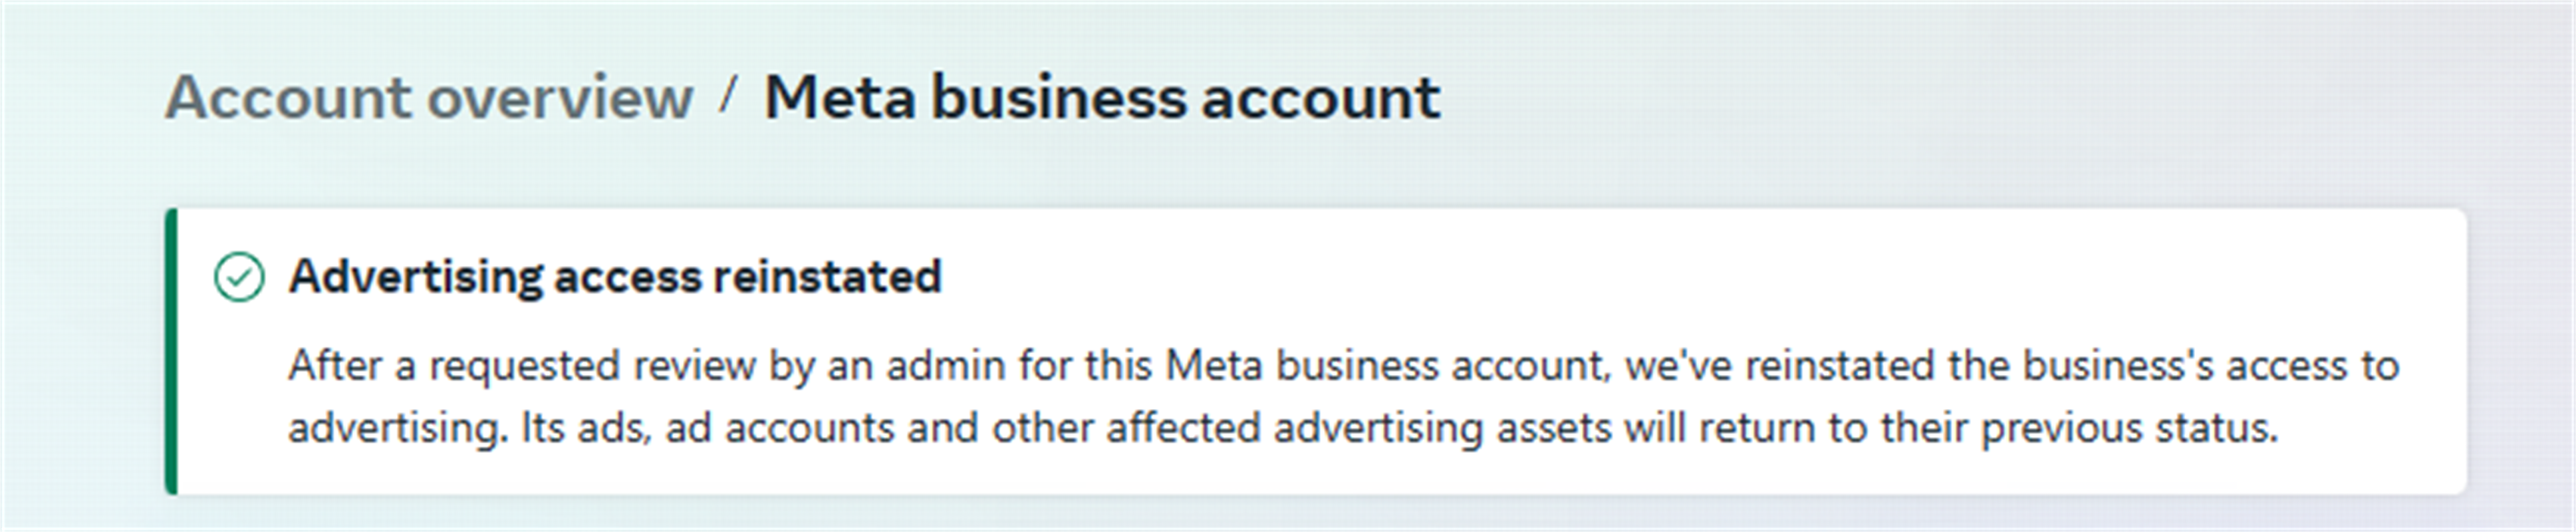 Business Manager Facebook/ BM5 / Ads limit 250$ / Created 1 ad account / Resisted